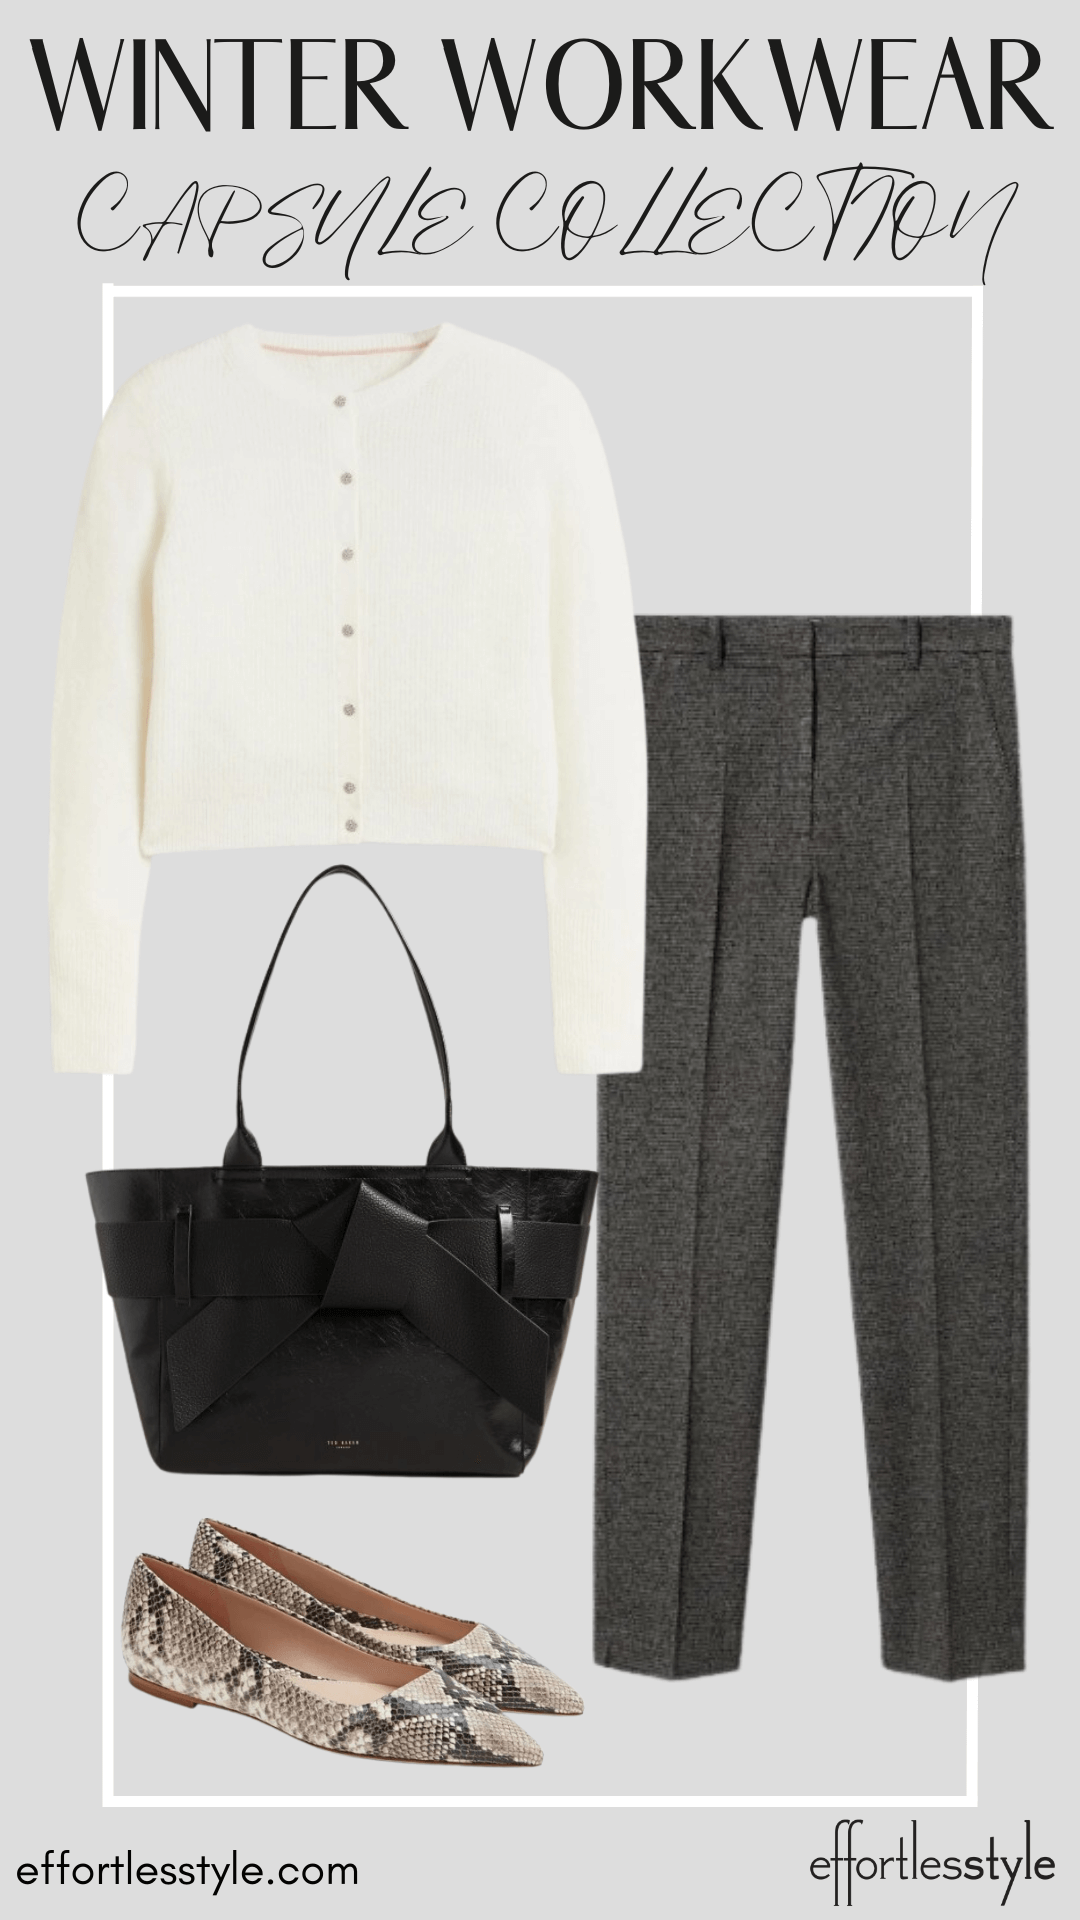 Elevated Cardigan & Ankle Pants how to style grey for the office how to soften grey pants how to style ankle pants for the office personal stylists share ideas on styling ankle pants how to style ankle pants with a cardigan